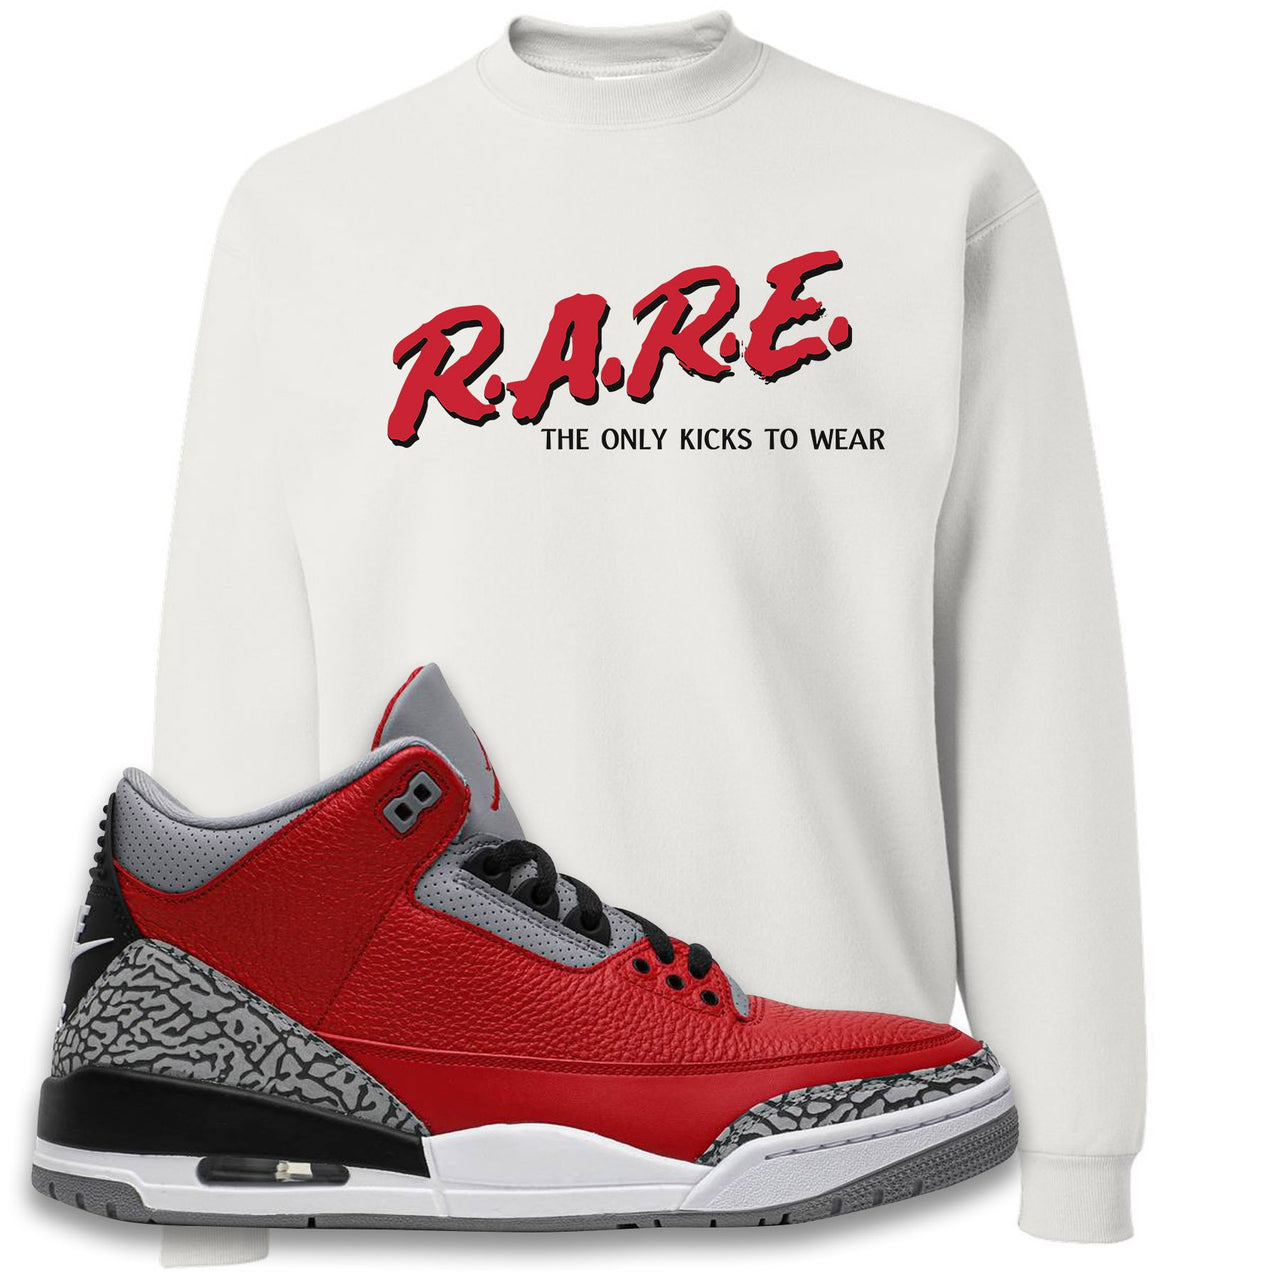 Chicago Exclusive Jordan 3 Red Cement Sneaker White Crewneck Sweatshirt | Crewneck to match Jordan 3 All Star Red Cement Shoes | Rare